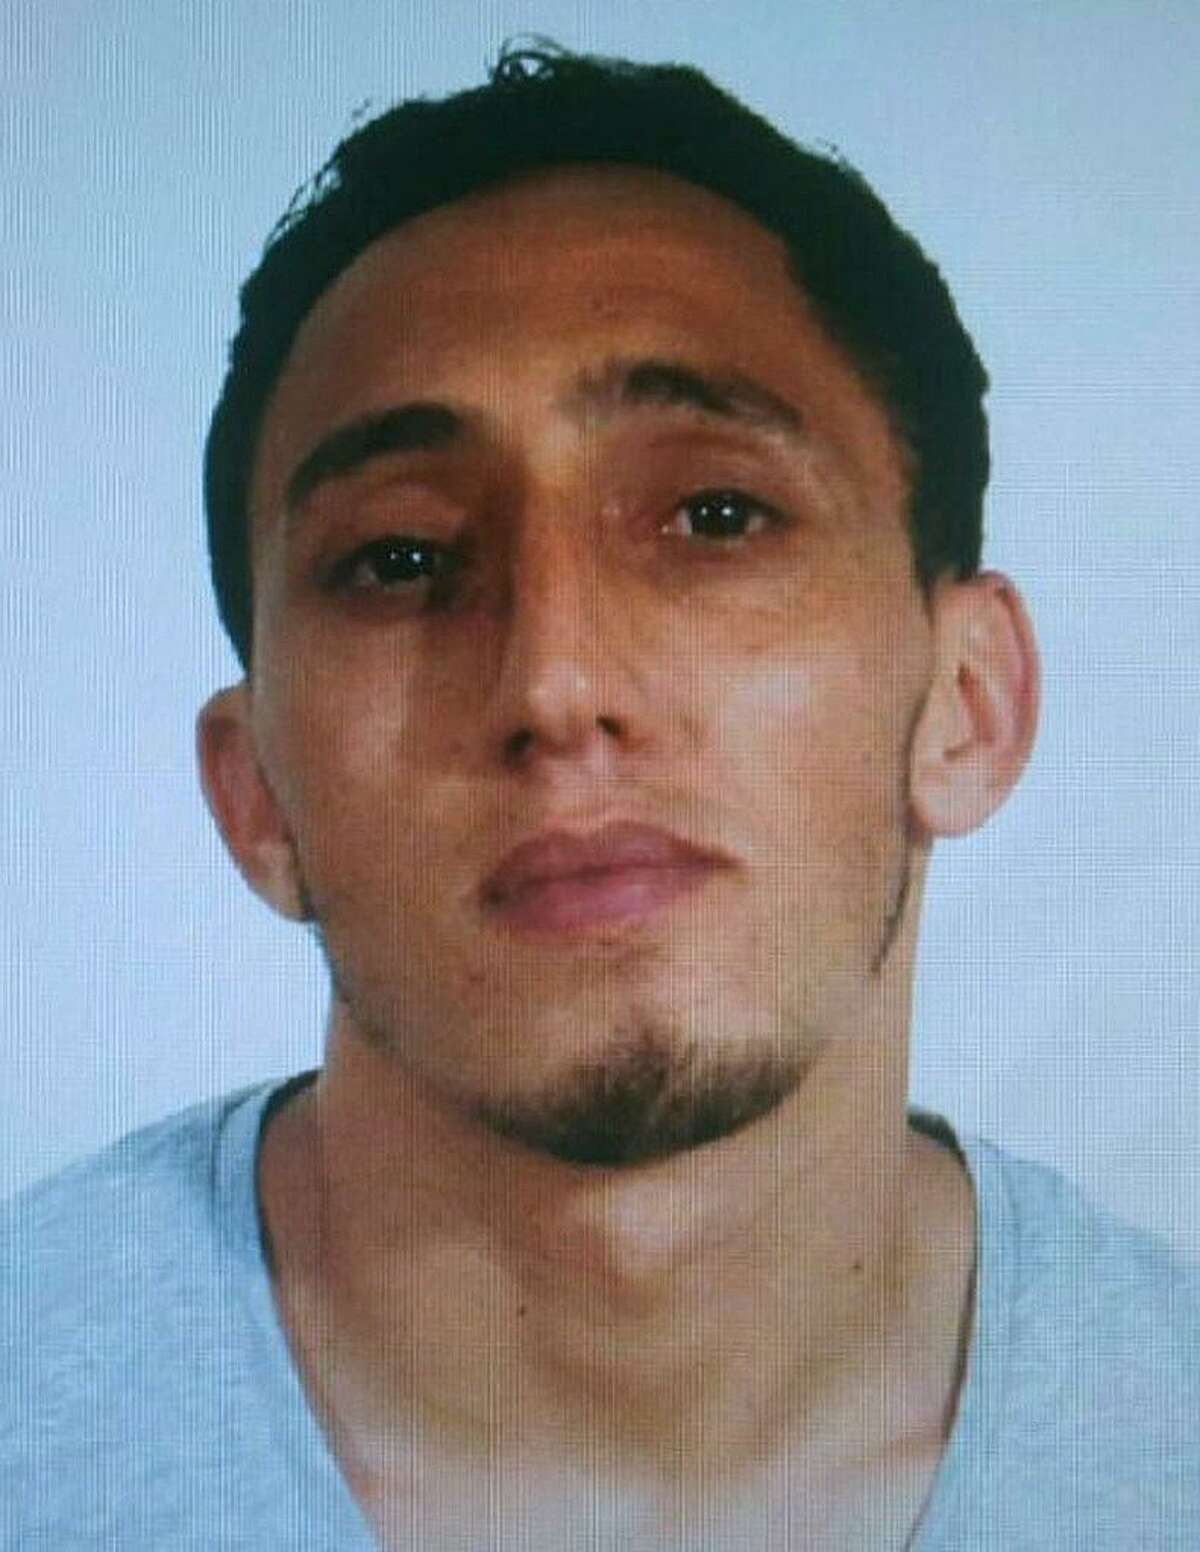 A handout picture provided by the Spanish National Police on August 17, 2017 shows Moroccan Driss Oukabir, alleged suspect linked to the attack of Barcelona on August 17, 2017 when a van ploughed into the crowd, killing 13 persons and injuring over 80 on the Rambla in Barcelona. A driver deliberately rammed a van into a crowd on Barcelona's most popular street on August 17, 2017 killing at least 13 people before fleeing to a nearby bar, police said. Officers in Spain's second-largest city said the ramming on Las Ramblas was a "terrorist attack". / AFP PHOTO / Spanish National Police / HO / RESTRICTED TO EDITORIAL USE - MANDATORY CREDIT "AFP PHOTO/ SPANISH NATIONAL POLICE" - NO MARKETING - NO ADVERTISING CAMPAIGNS - DISTRIBUTED AS A SERVICE TO CLIENTS HO/AFP/Getty Images